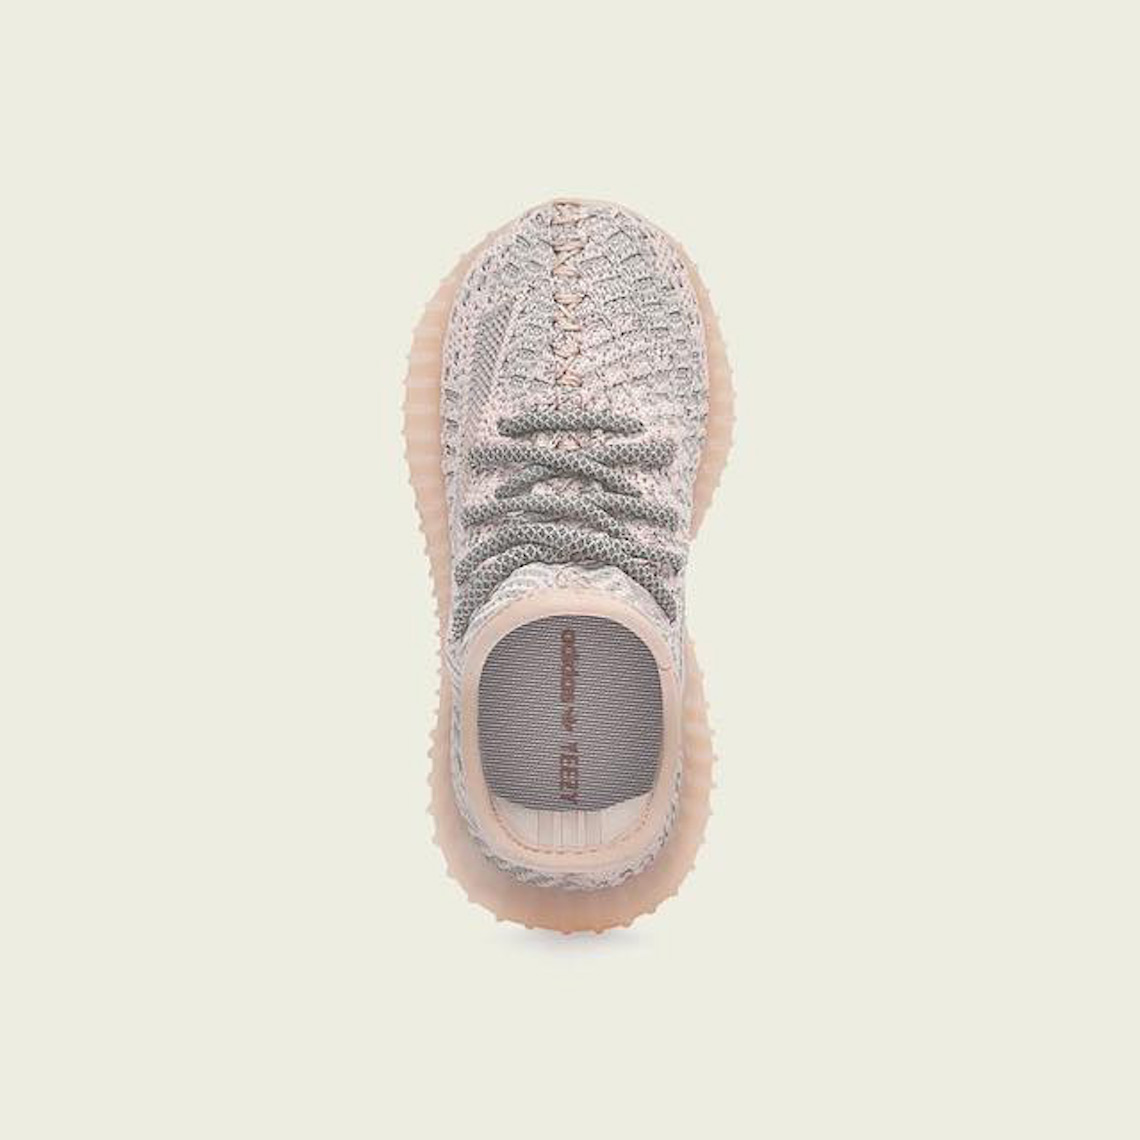 Adidas Yeezy exercise 350 Synth Release Date 6